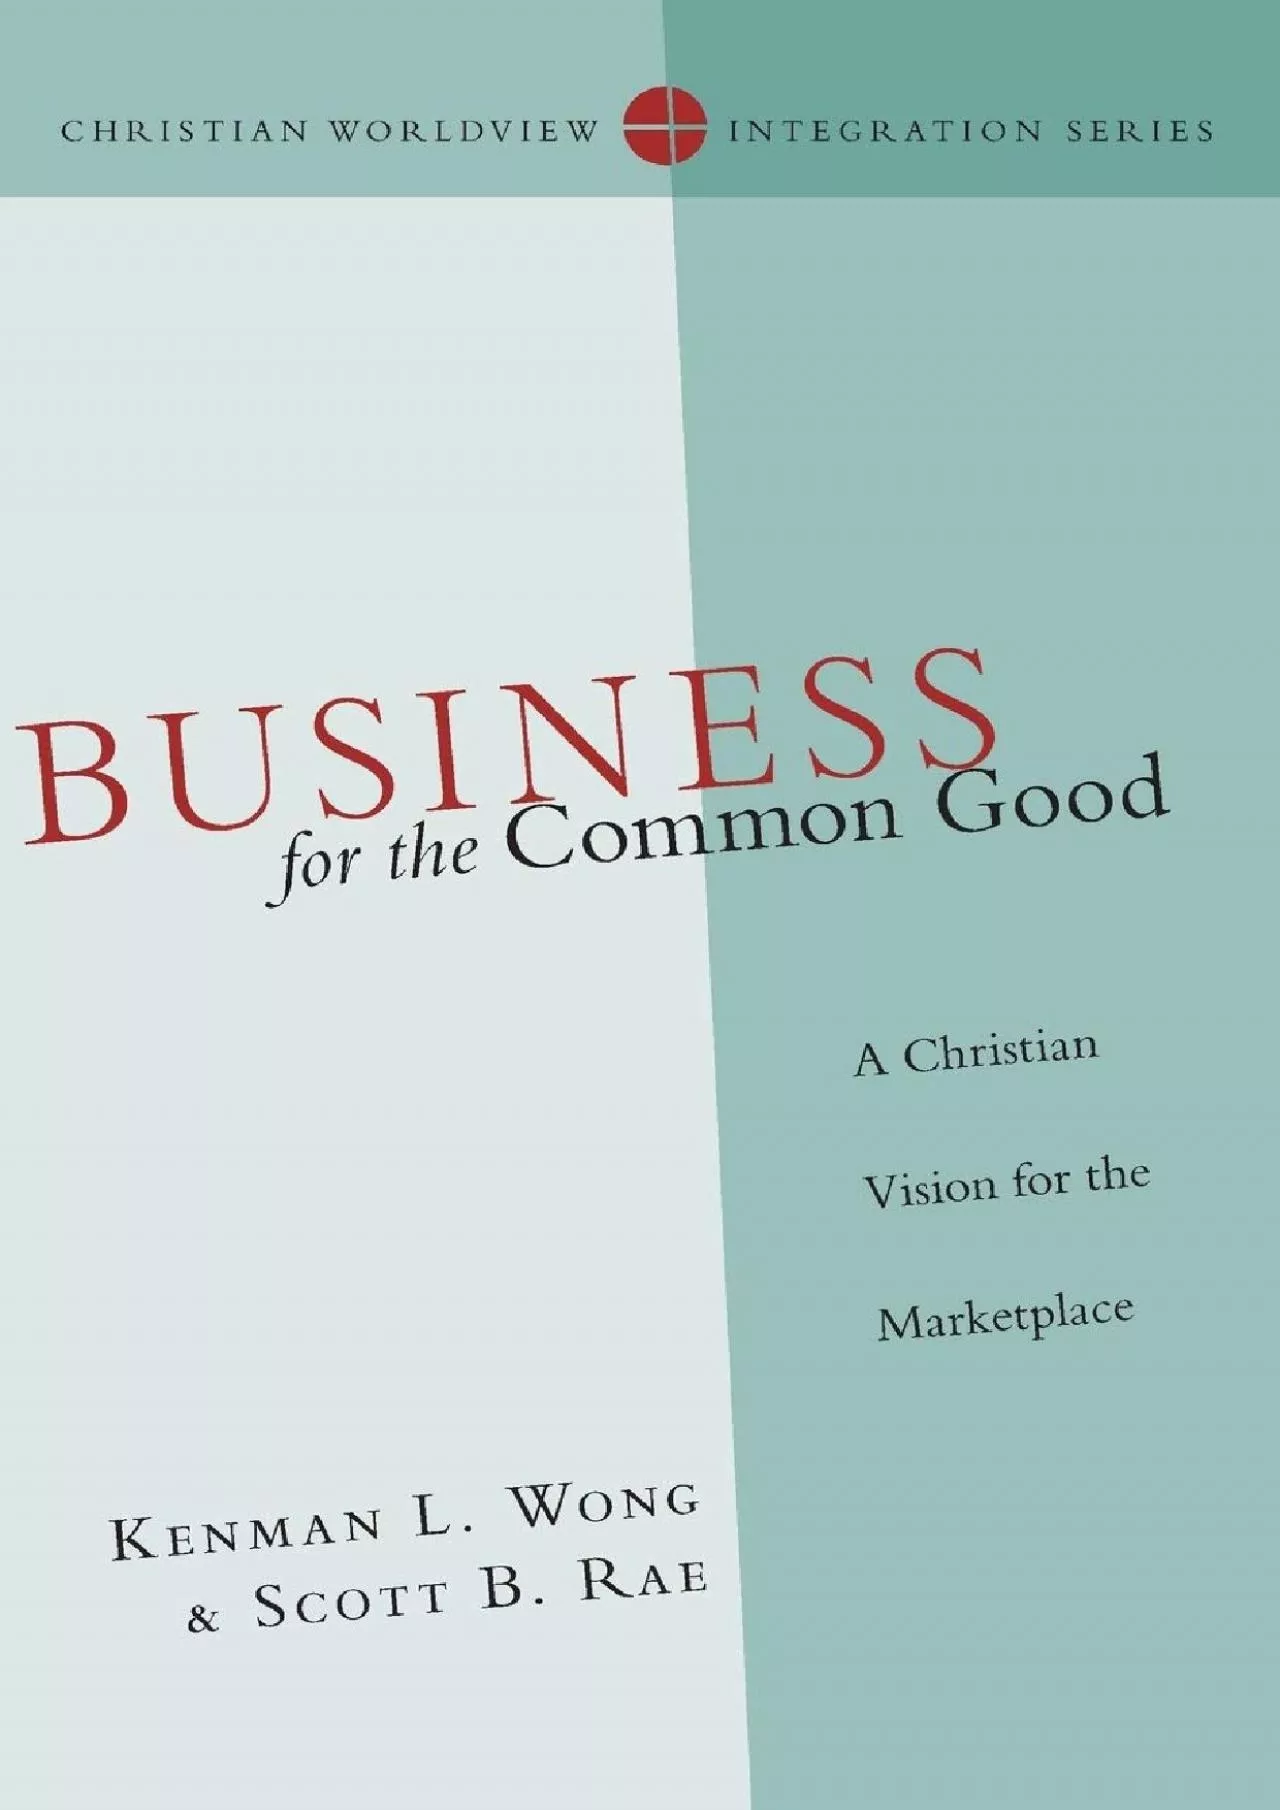 (DOWNLOAD)-Business for the Common Good: A Christian Vision for the Marketplace (Christian